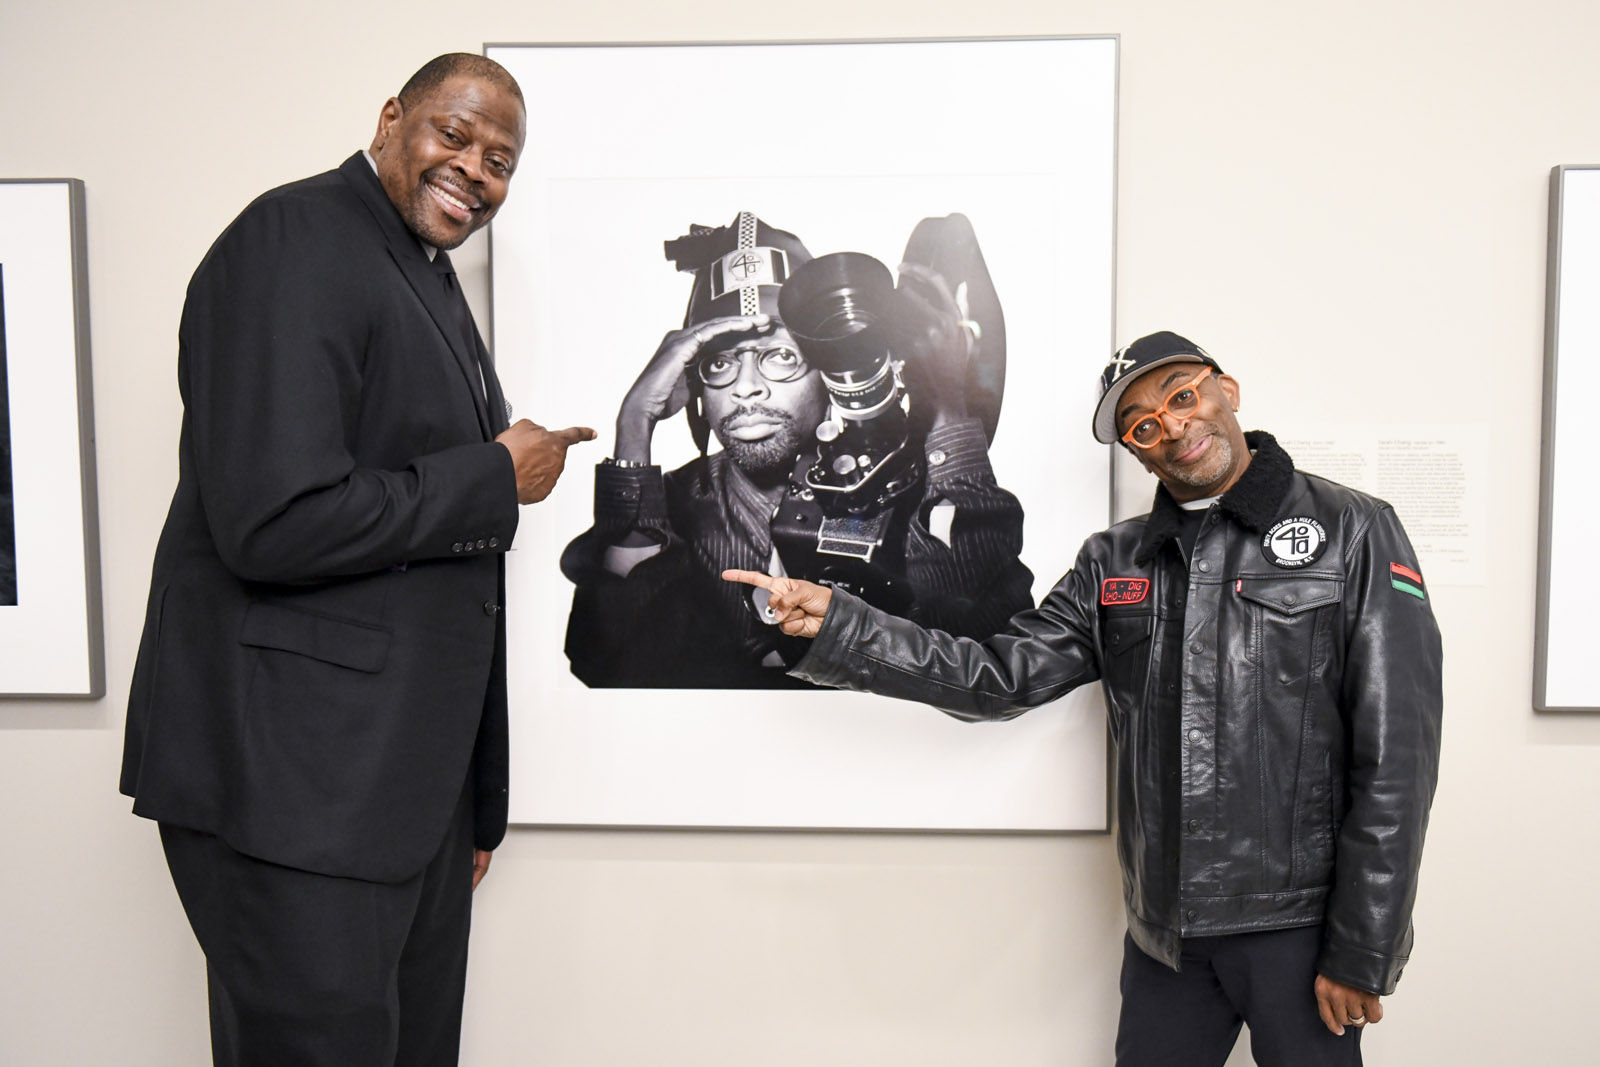 Patrick Ewing and Spike Lee pose for a picture at the National Portrait Gallery. Film director, producer, writer and actor Spike Lee received the 2017 Portrait of a Nation Prize at The American Portrait Gala 2017 at Smithsonian's National Portrait Gallery on Sunday, Nov. 19, 2017 in Washington, D.C.(Courtesy National Portrait Gallery/Zach Hilty/BFA.com)